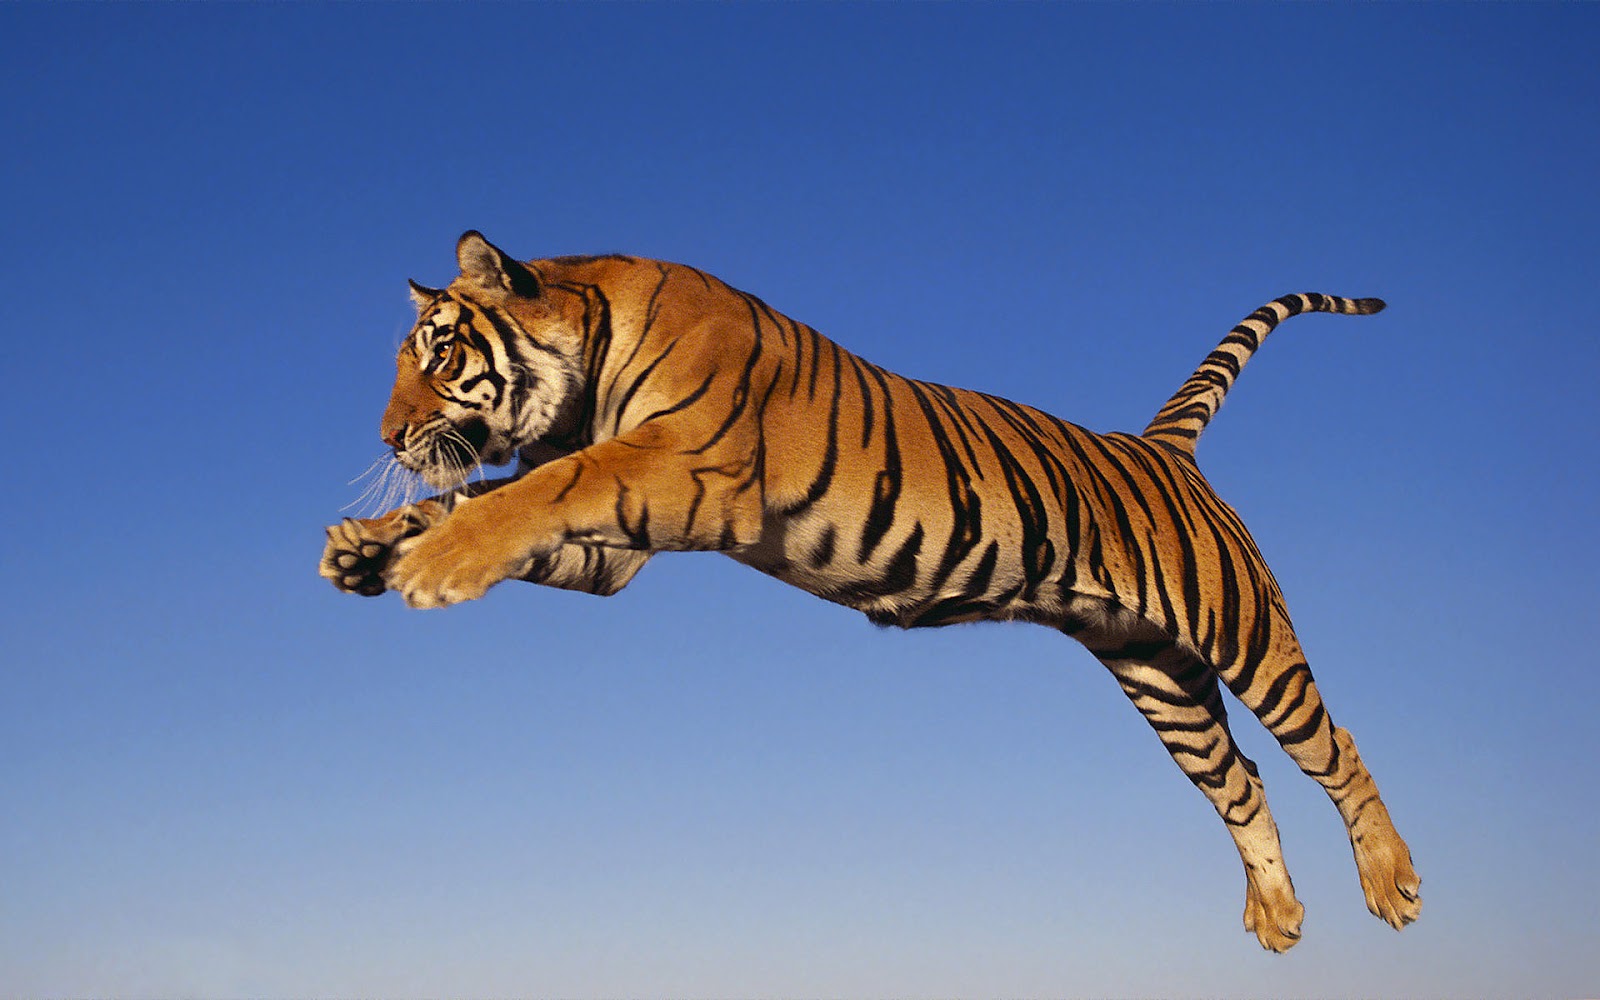 HD Tiger Wallpaper With A Jumping And Attacking